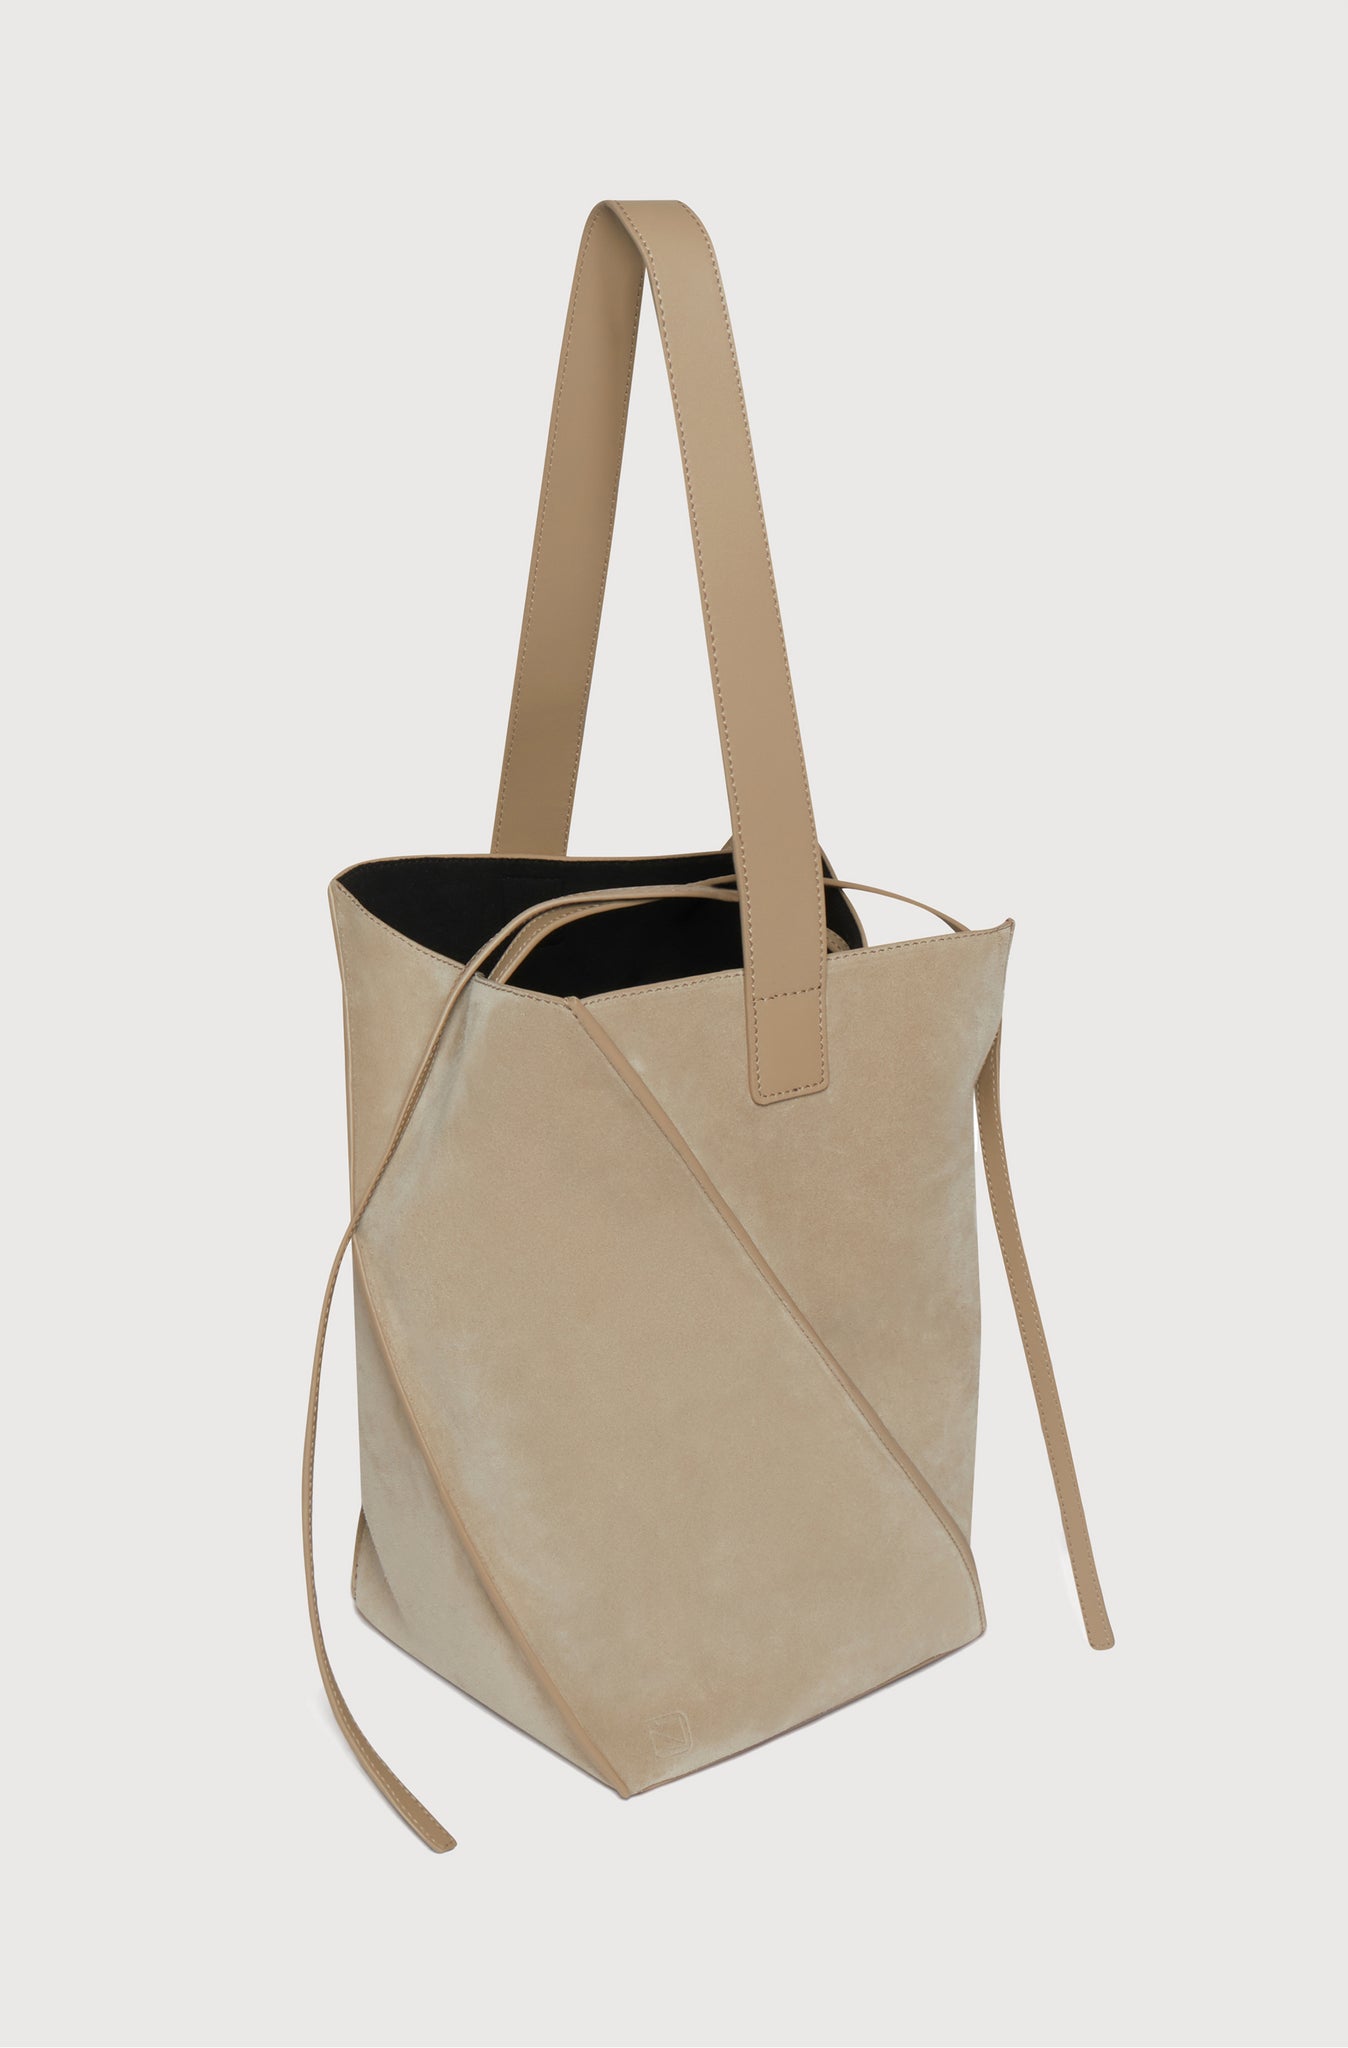 SWIRL TOTE - MOUTON SUEDE